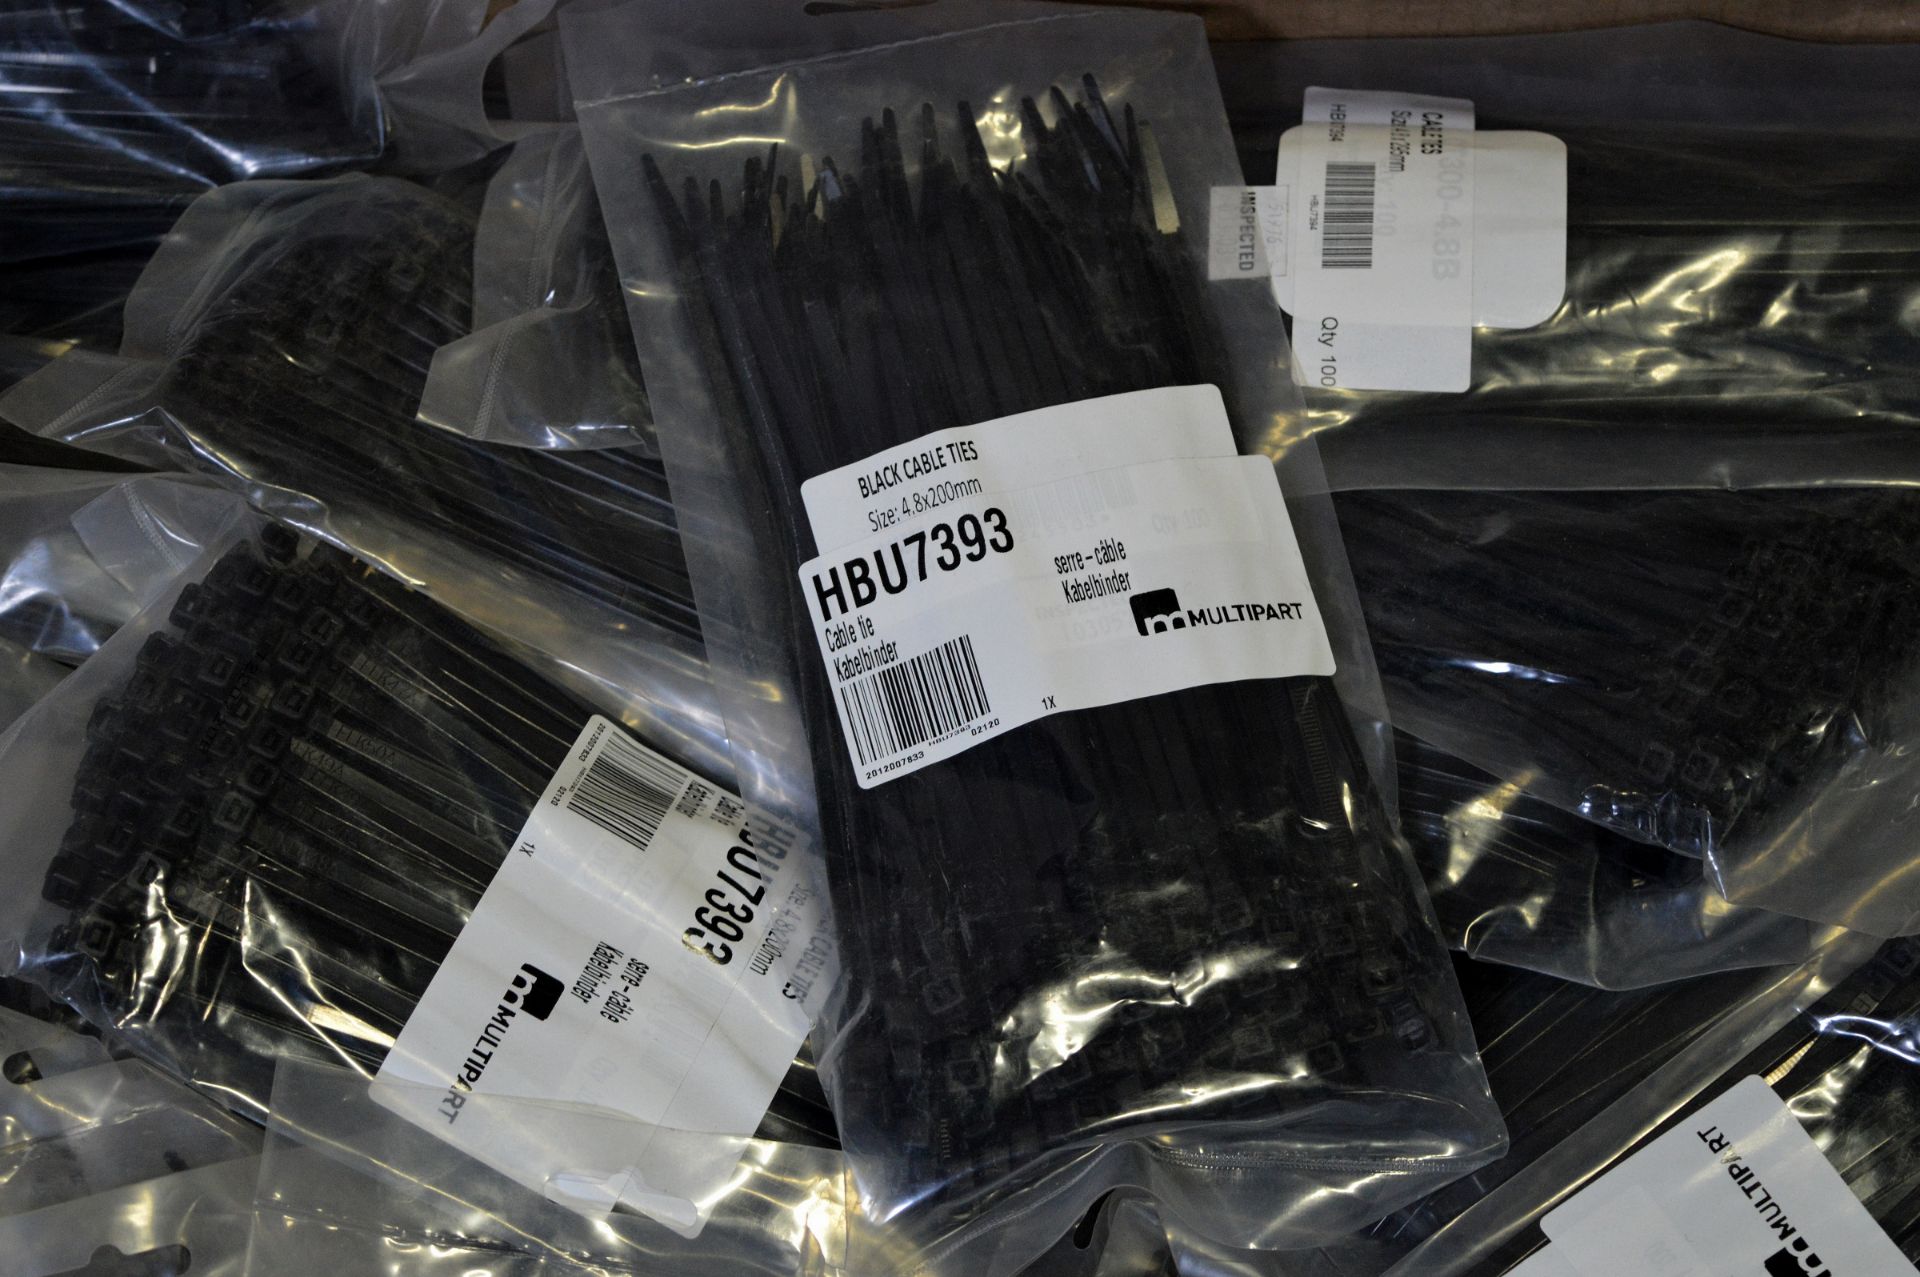 Black cable ties - 4.8x200mm & 4.8x295mm - unknown quantites - Image 3 of 4